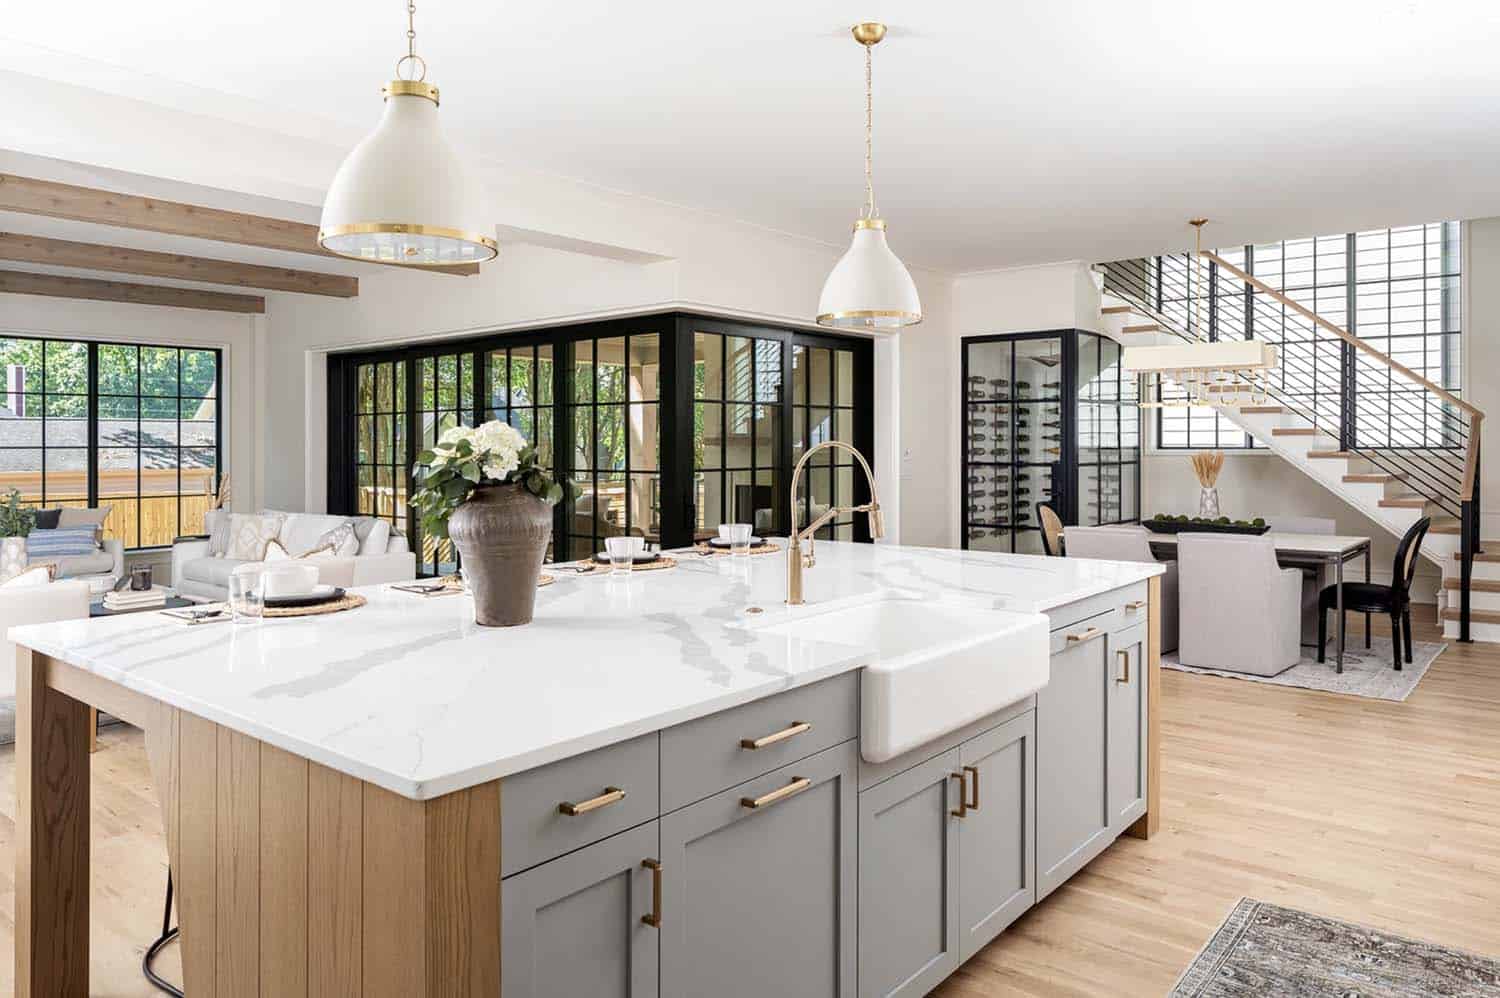 transitional kitchen with gray and wood tone cabinetry on the island